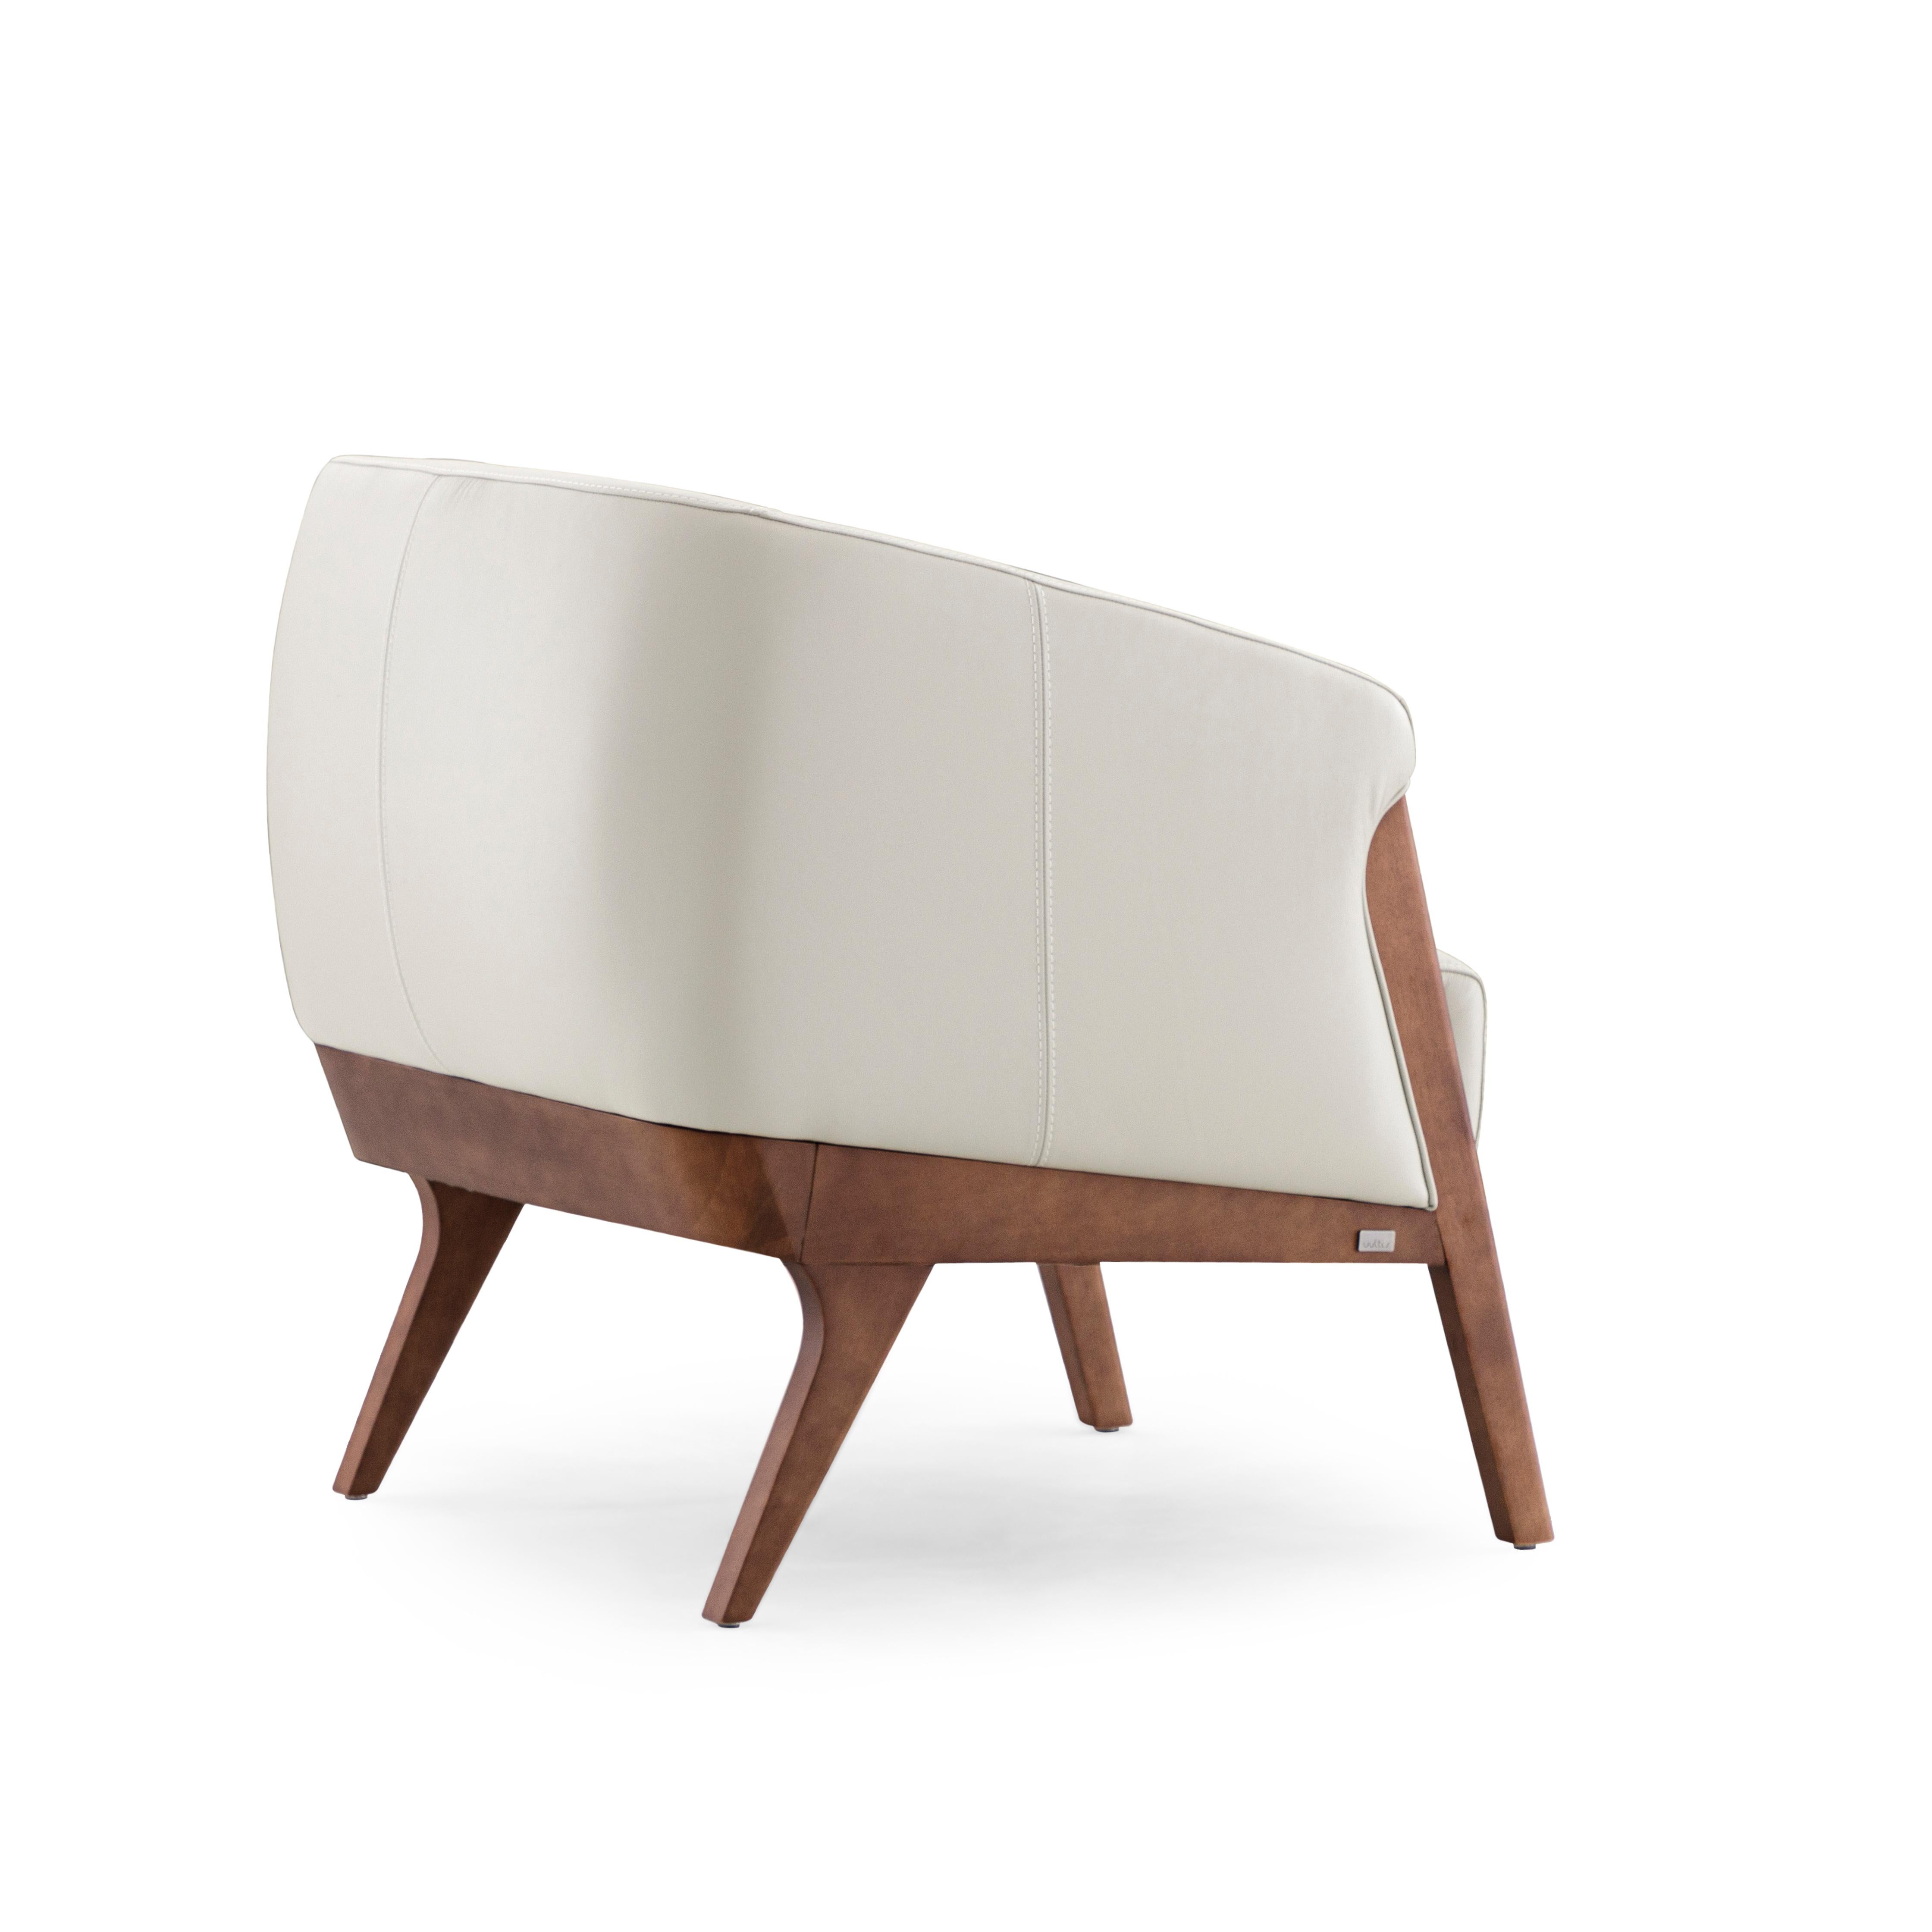 Abra Armchair in White Leather and Walnut Wood Finish In New Condition For Sale In Miami, FL